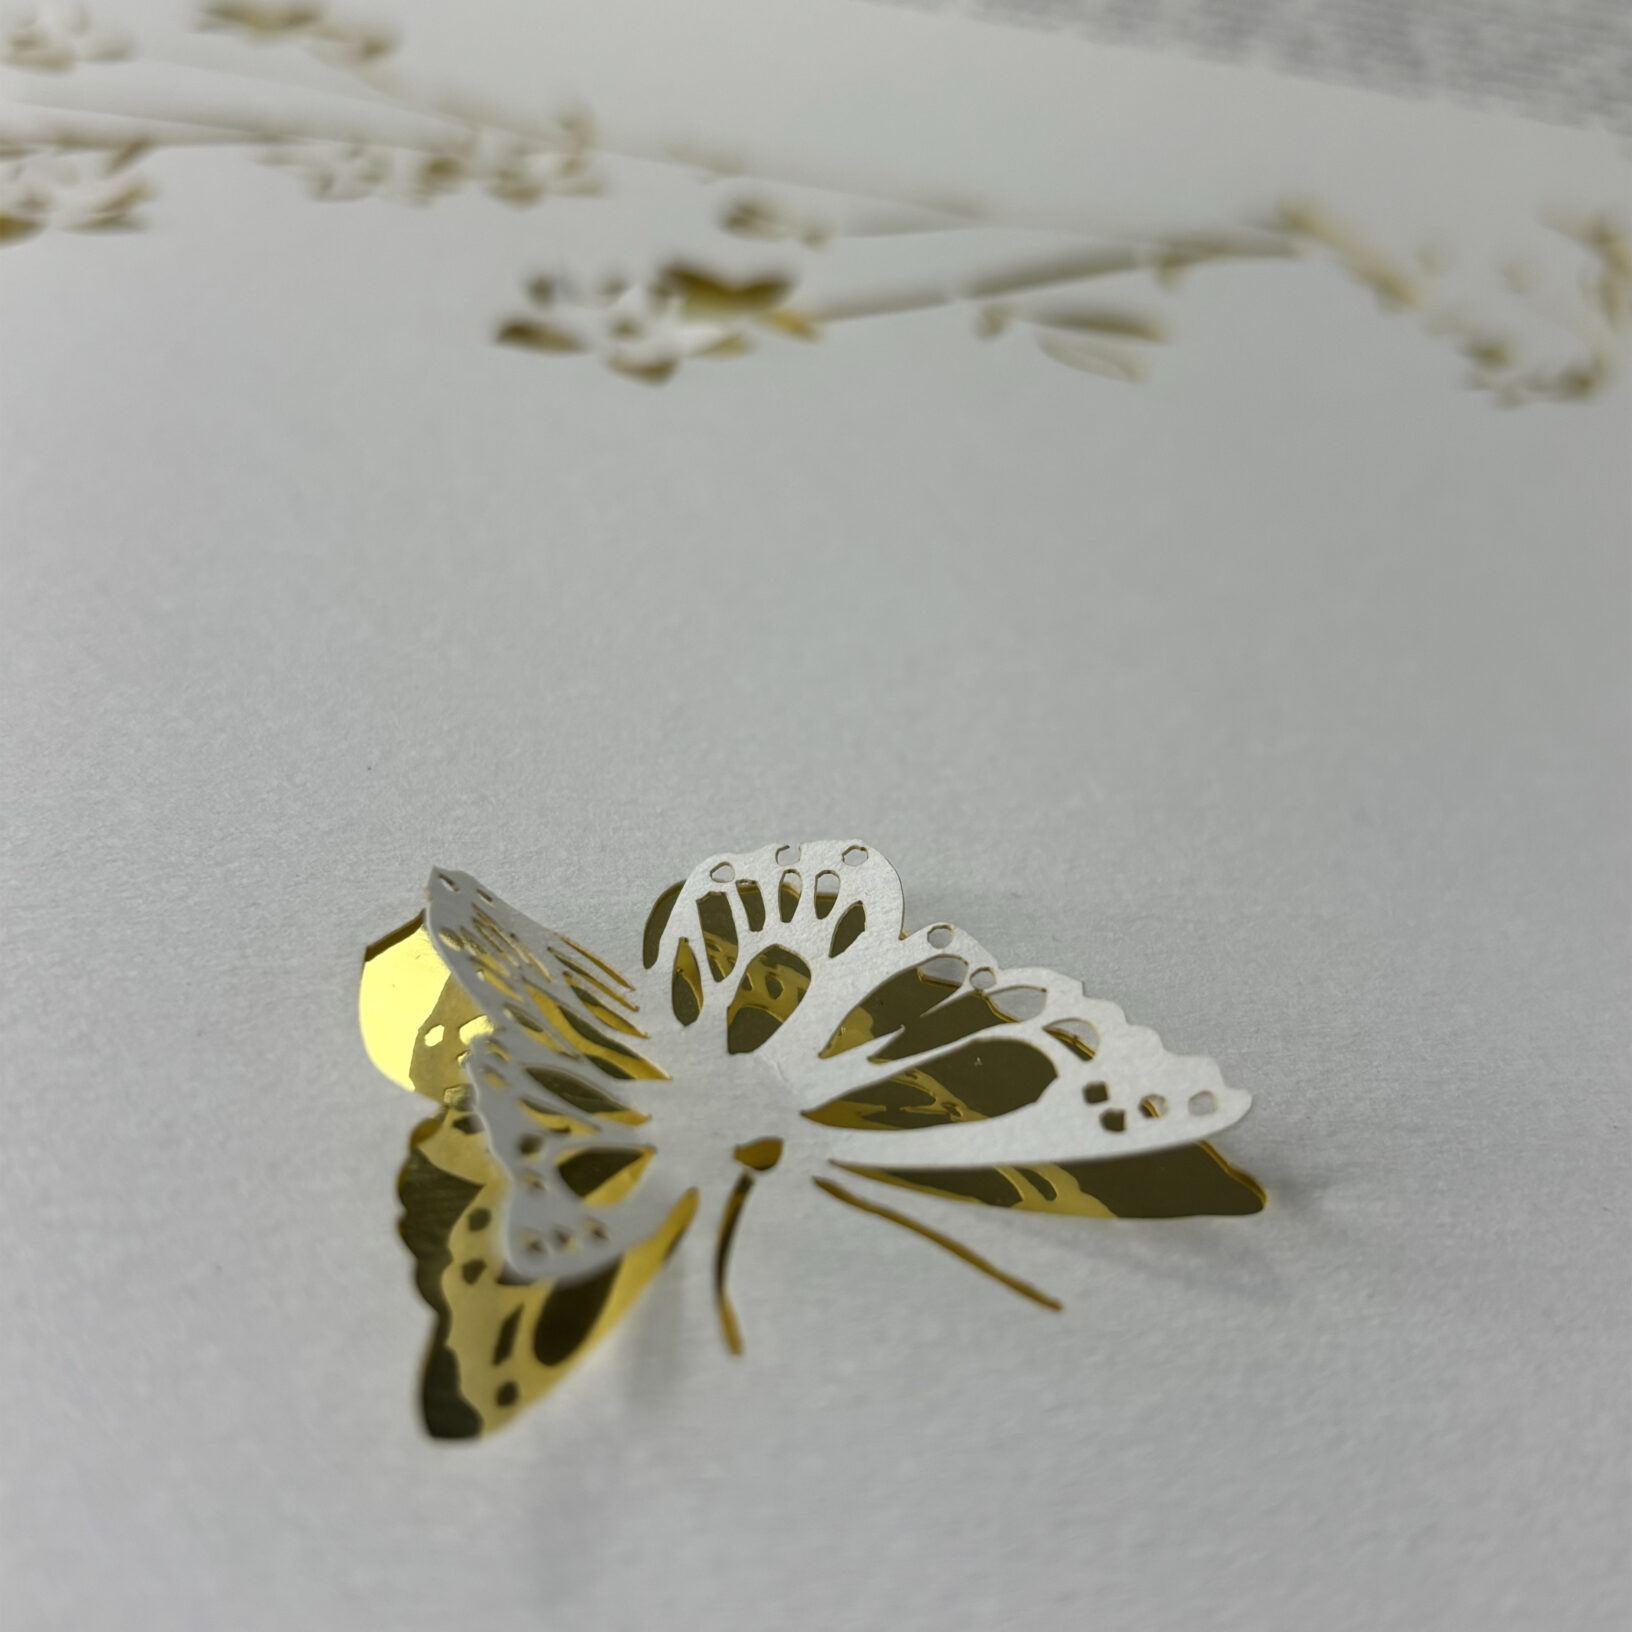 Ruth Stern Warzecha Papercut Blossomings Papercut - Metallic Bas Relief Gold Ketubah Marriage Contracts